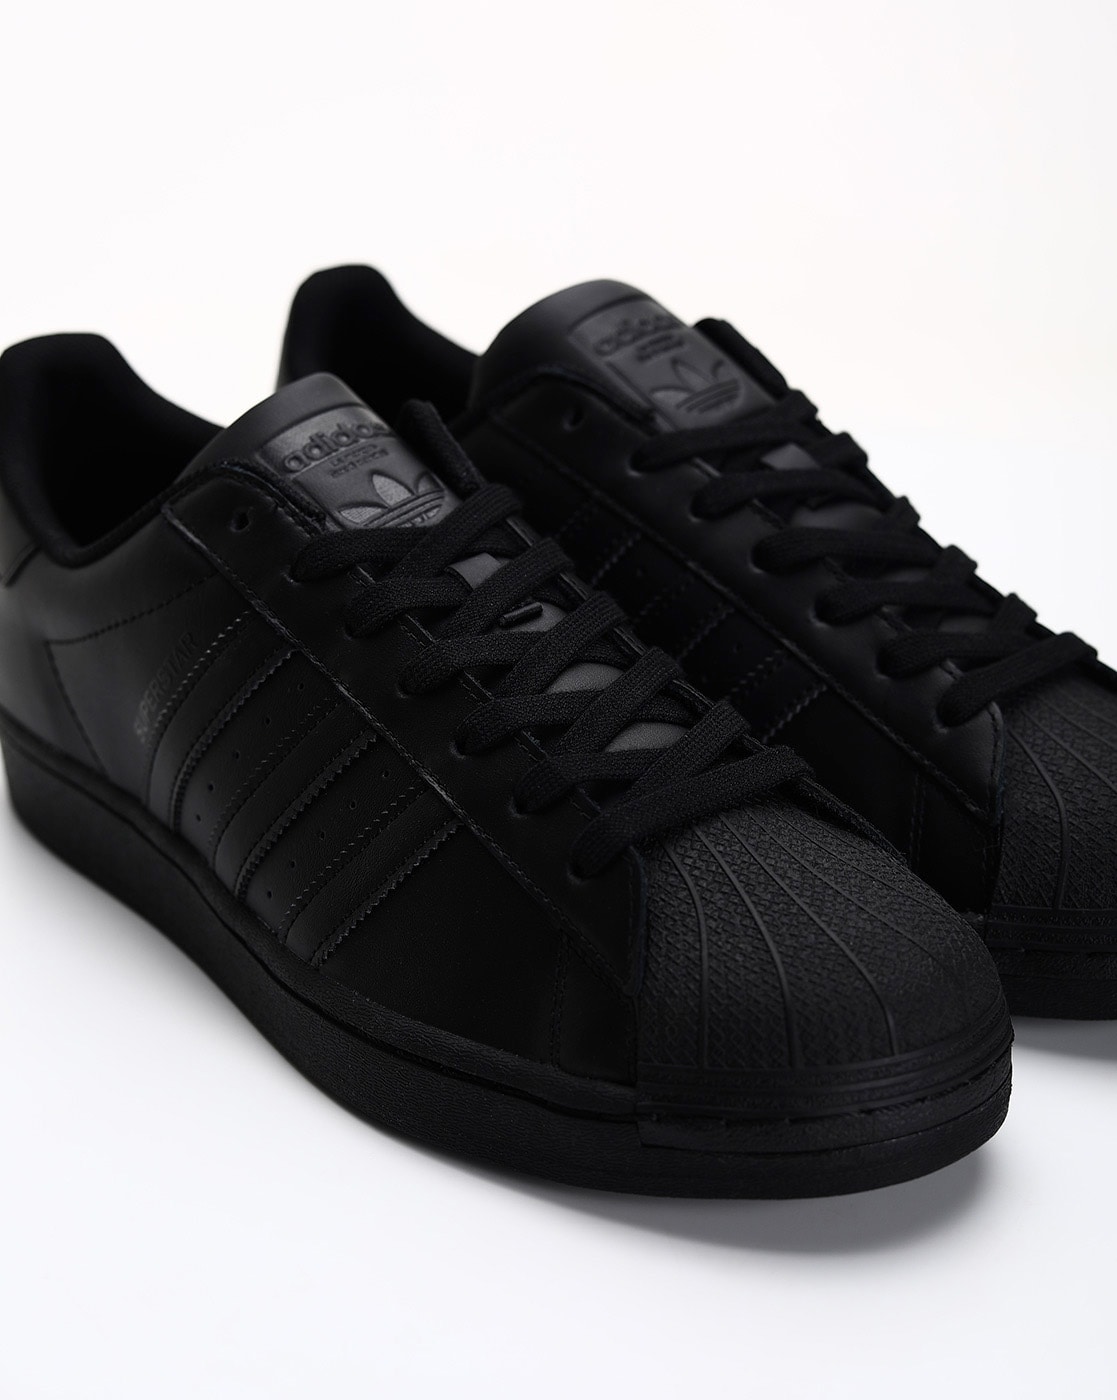 adidas sneakers all black